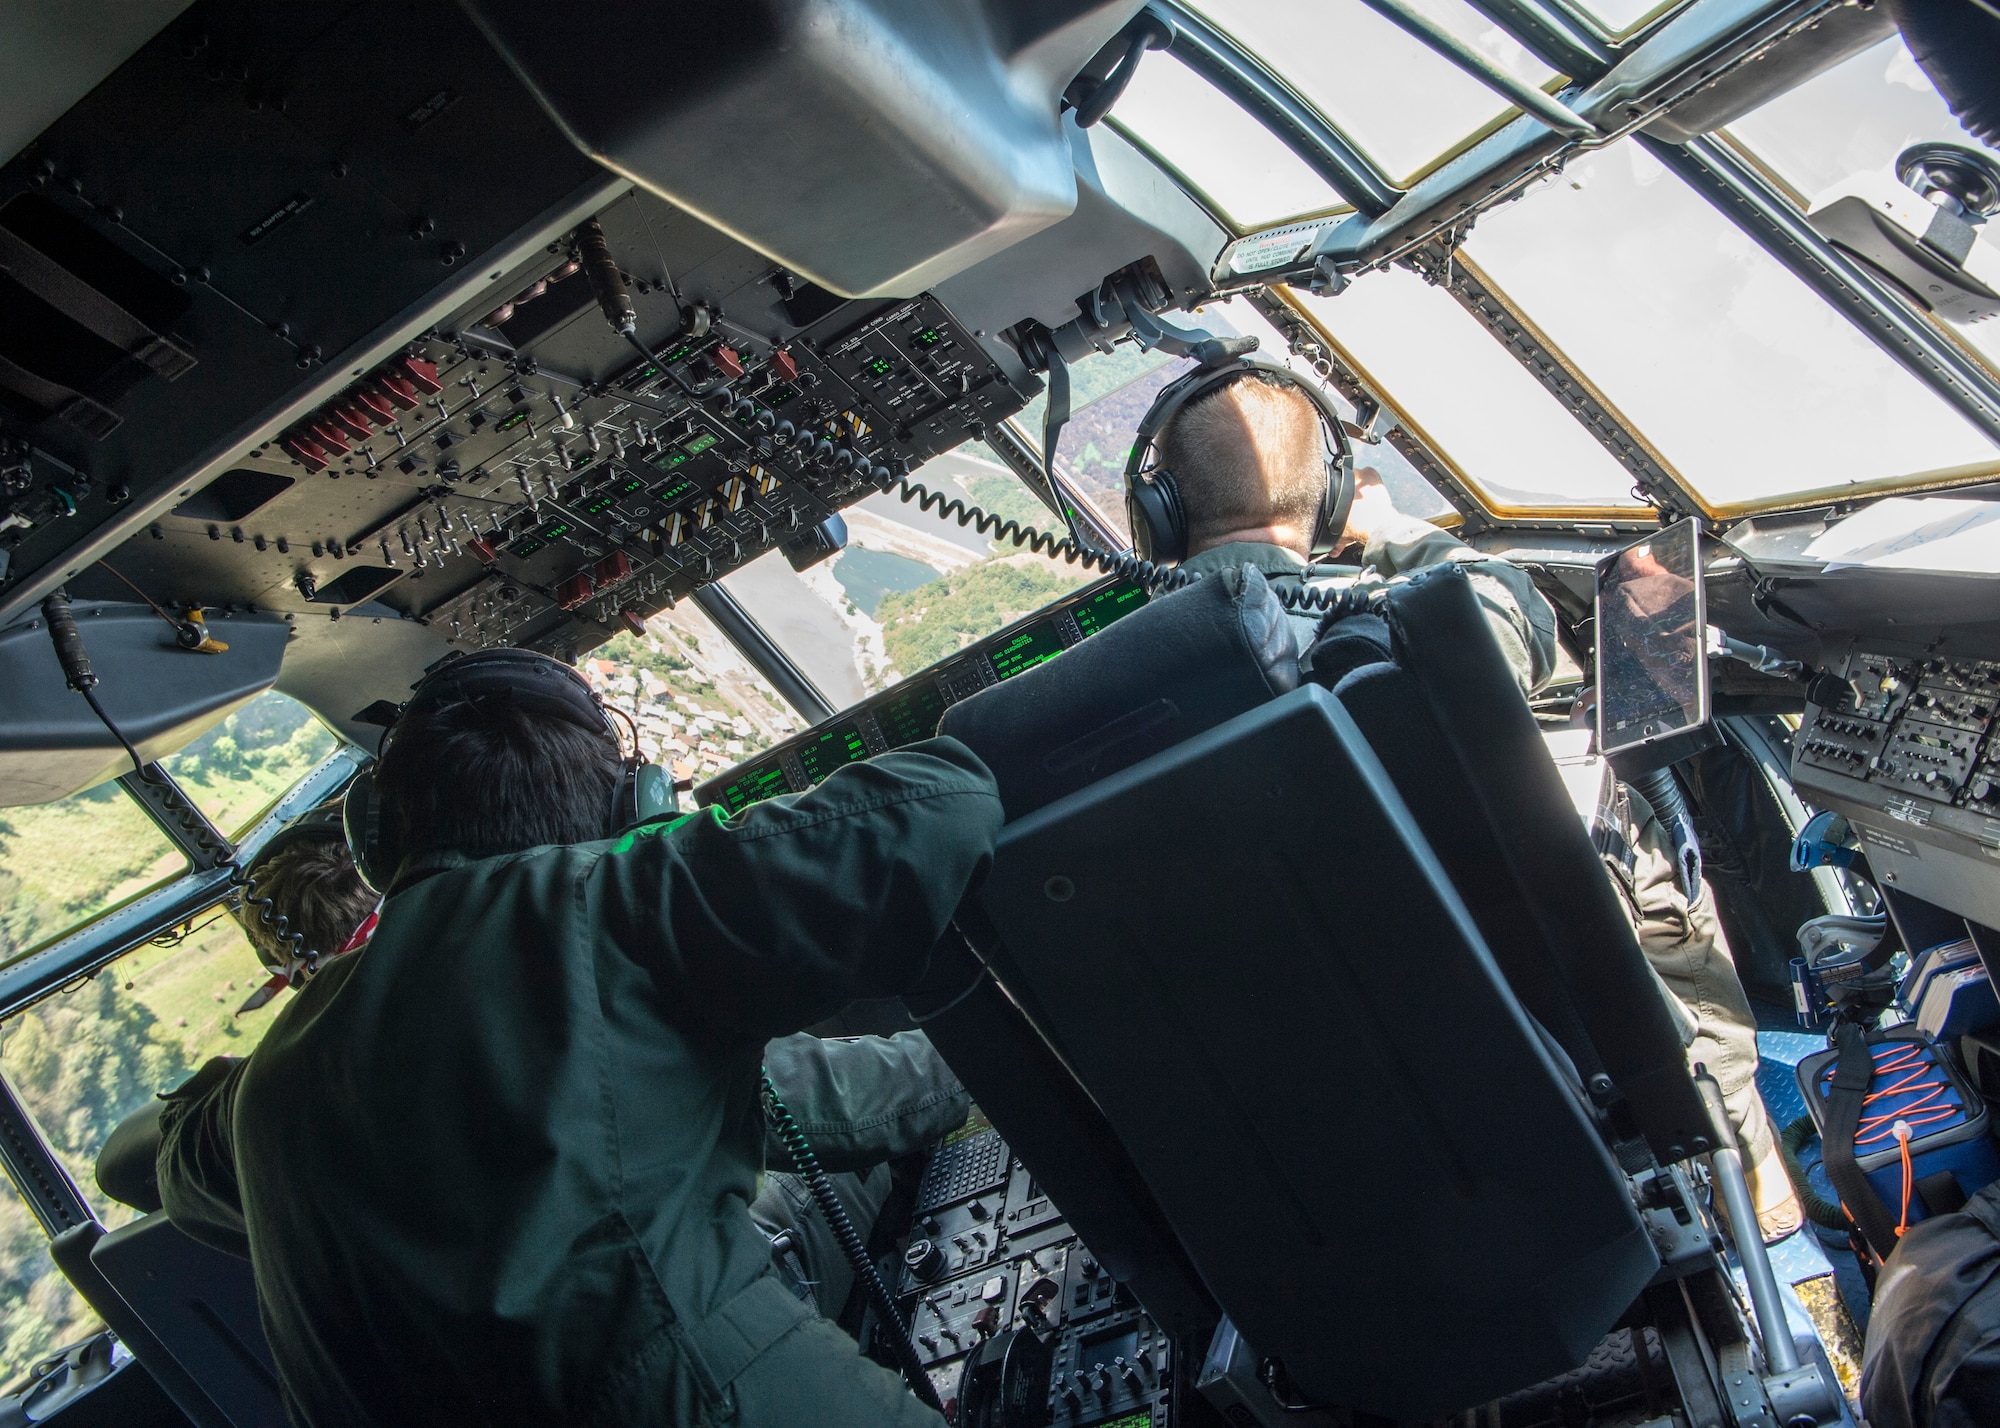 Romanian and U.S. Air Force members look out the windshield of a C-130J Super Hercules while flying over Romania, Aug.21, 2019. U.S. military members enhanced readiness and strengthened their relationship with Romania throughout exercise Carpathian Fall 2019. (U.S. Air Force photo by Staff Sgt. Kirby Turbak)